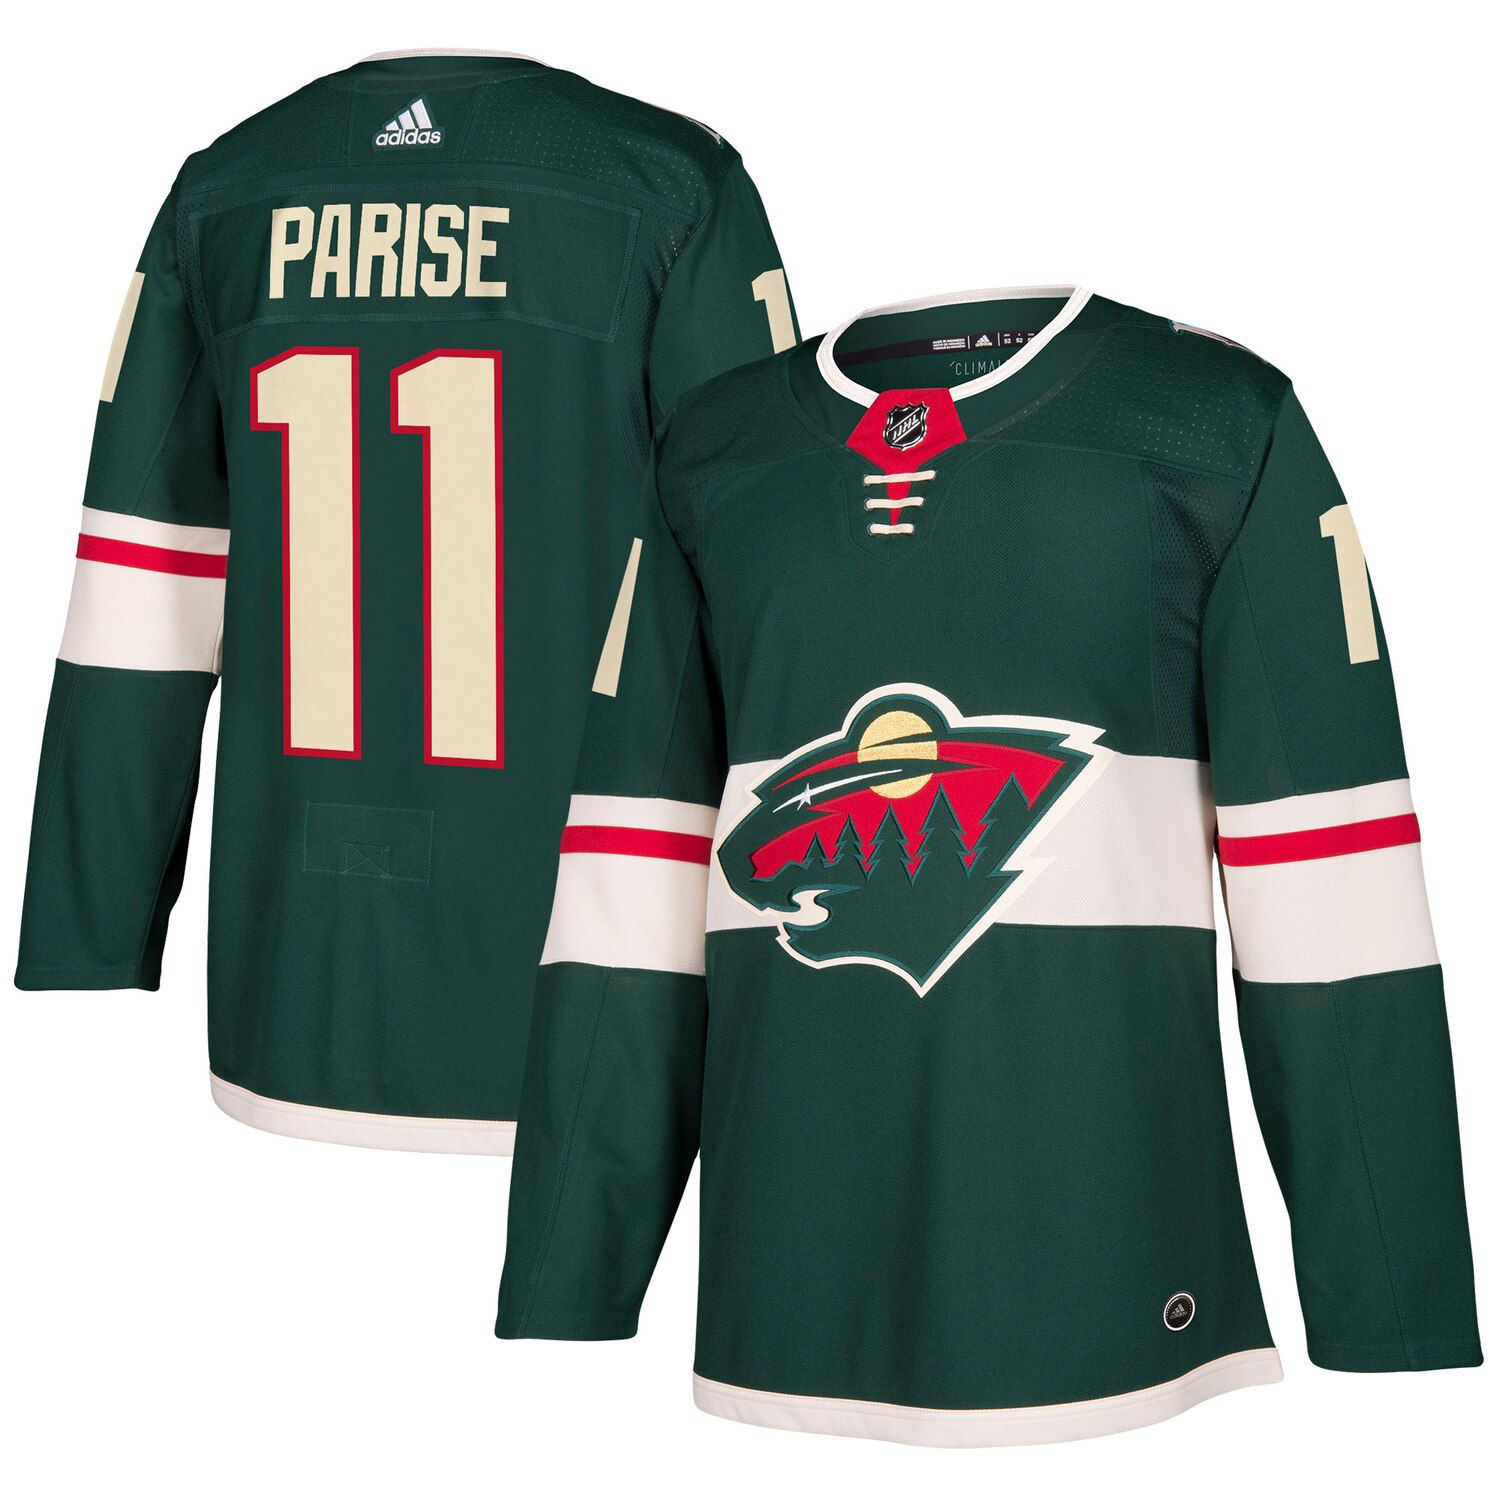 parise youth jersey